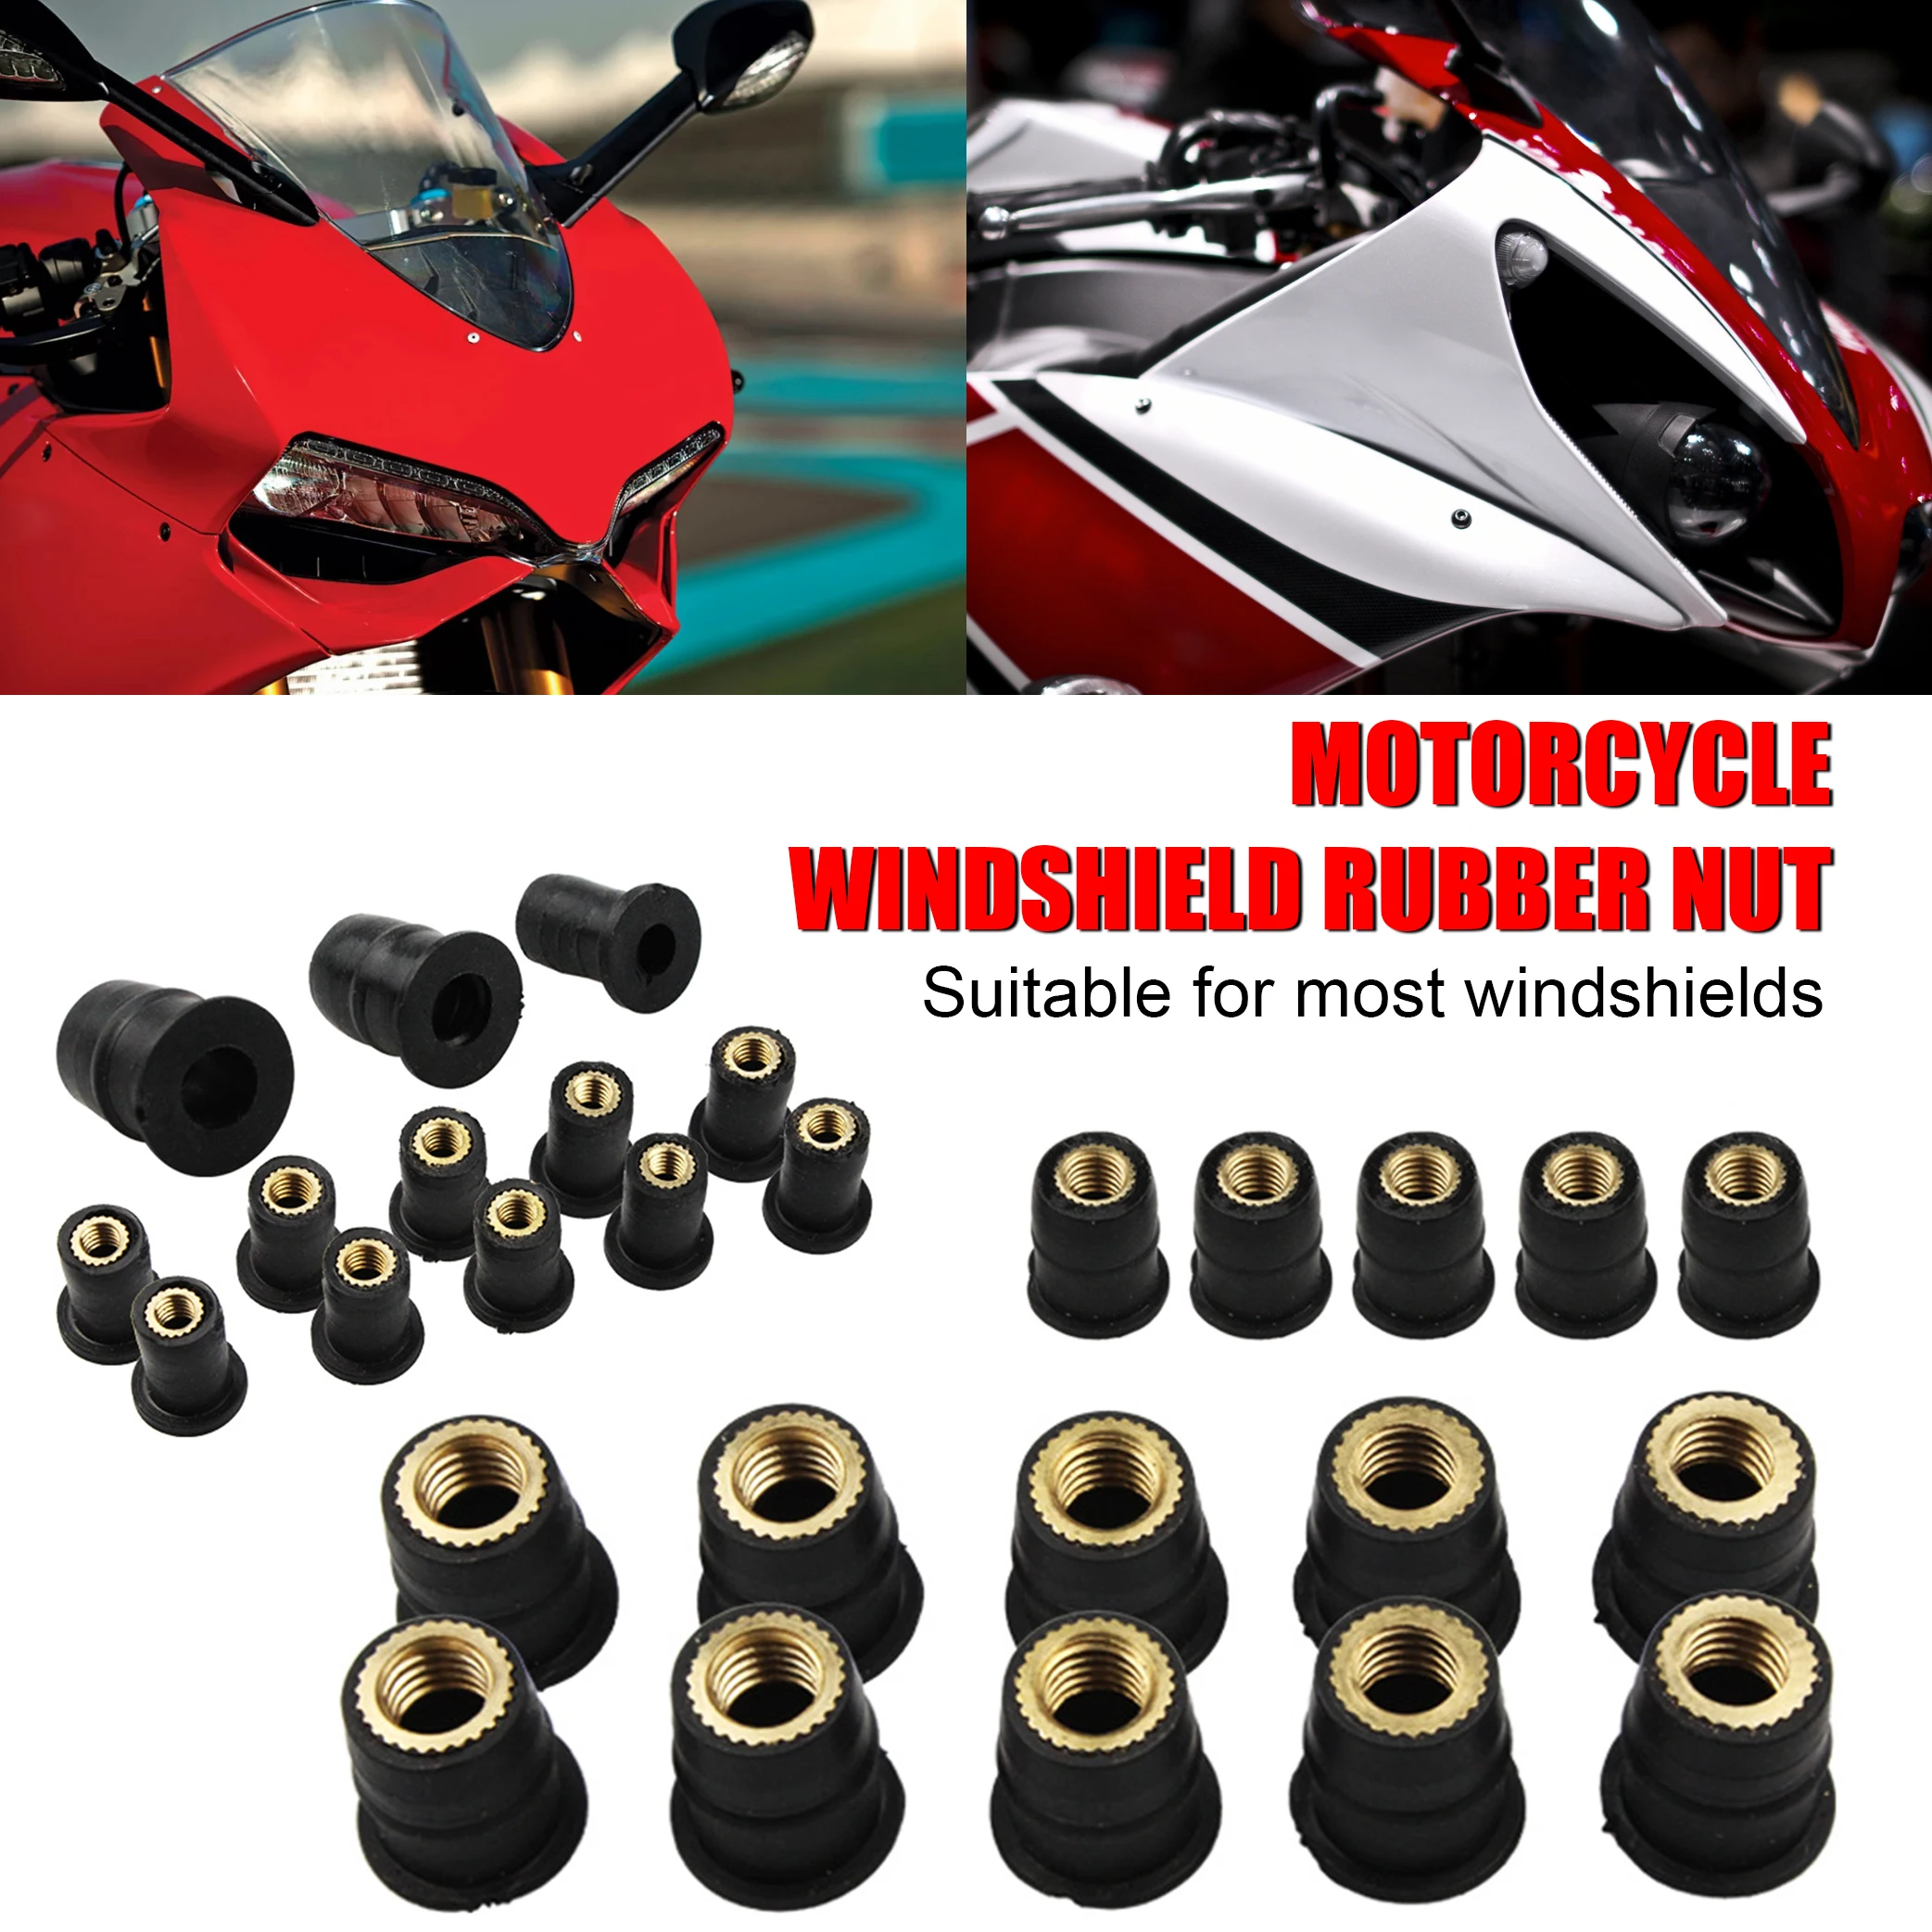 

10Pcs Motorcycle Windshield Nuts M4 M5 M6 Rubber Windshield Fairing Bolt Nut Fastener Universal Motorcycle Modified Accessories